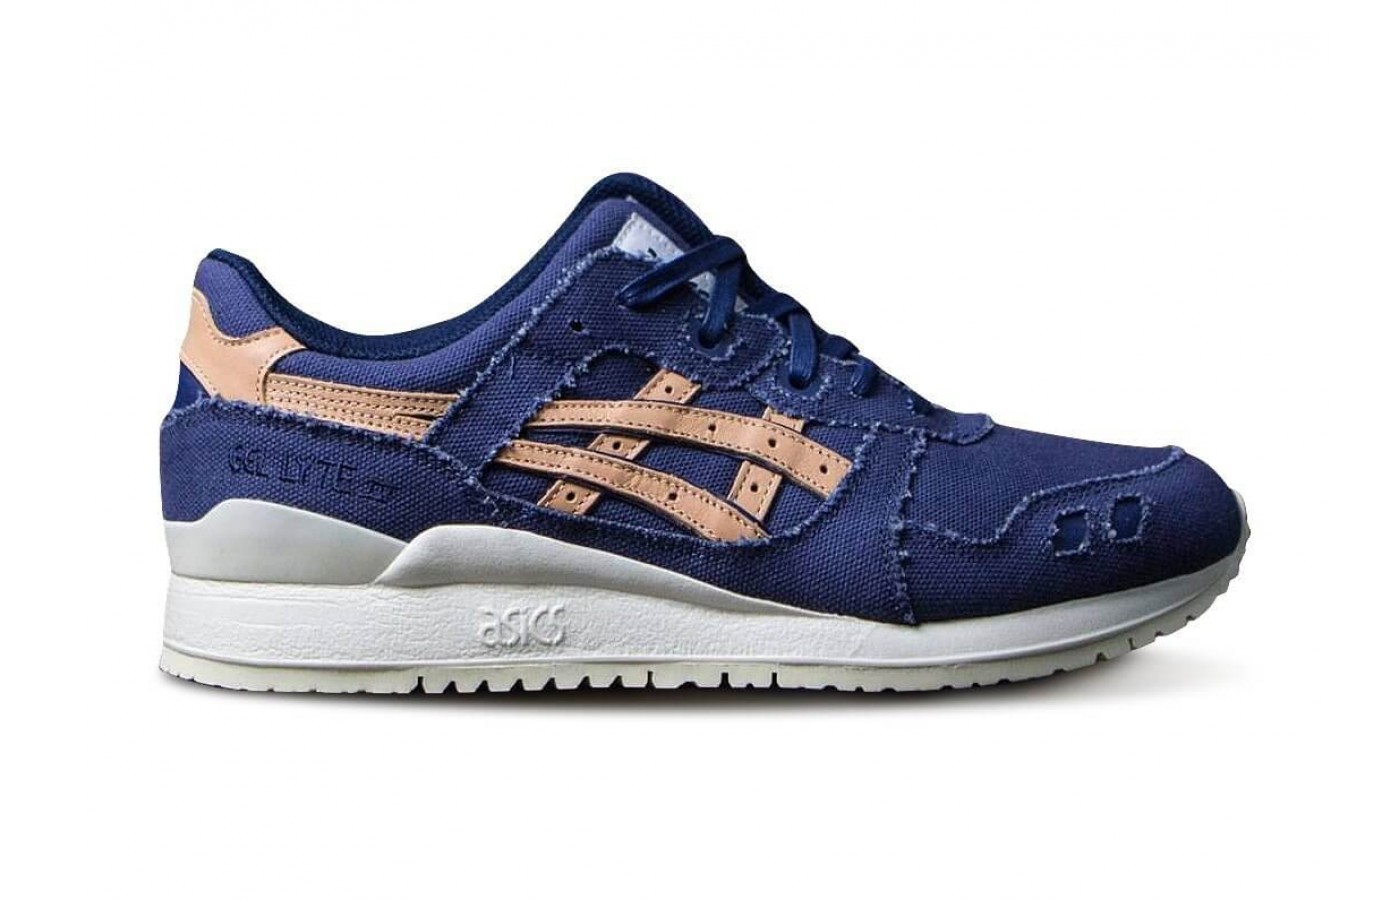 The Asics Gel Lyte III features a mesh and leather upper